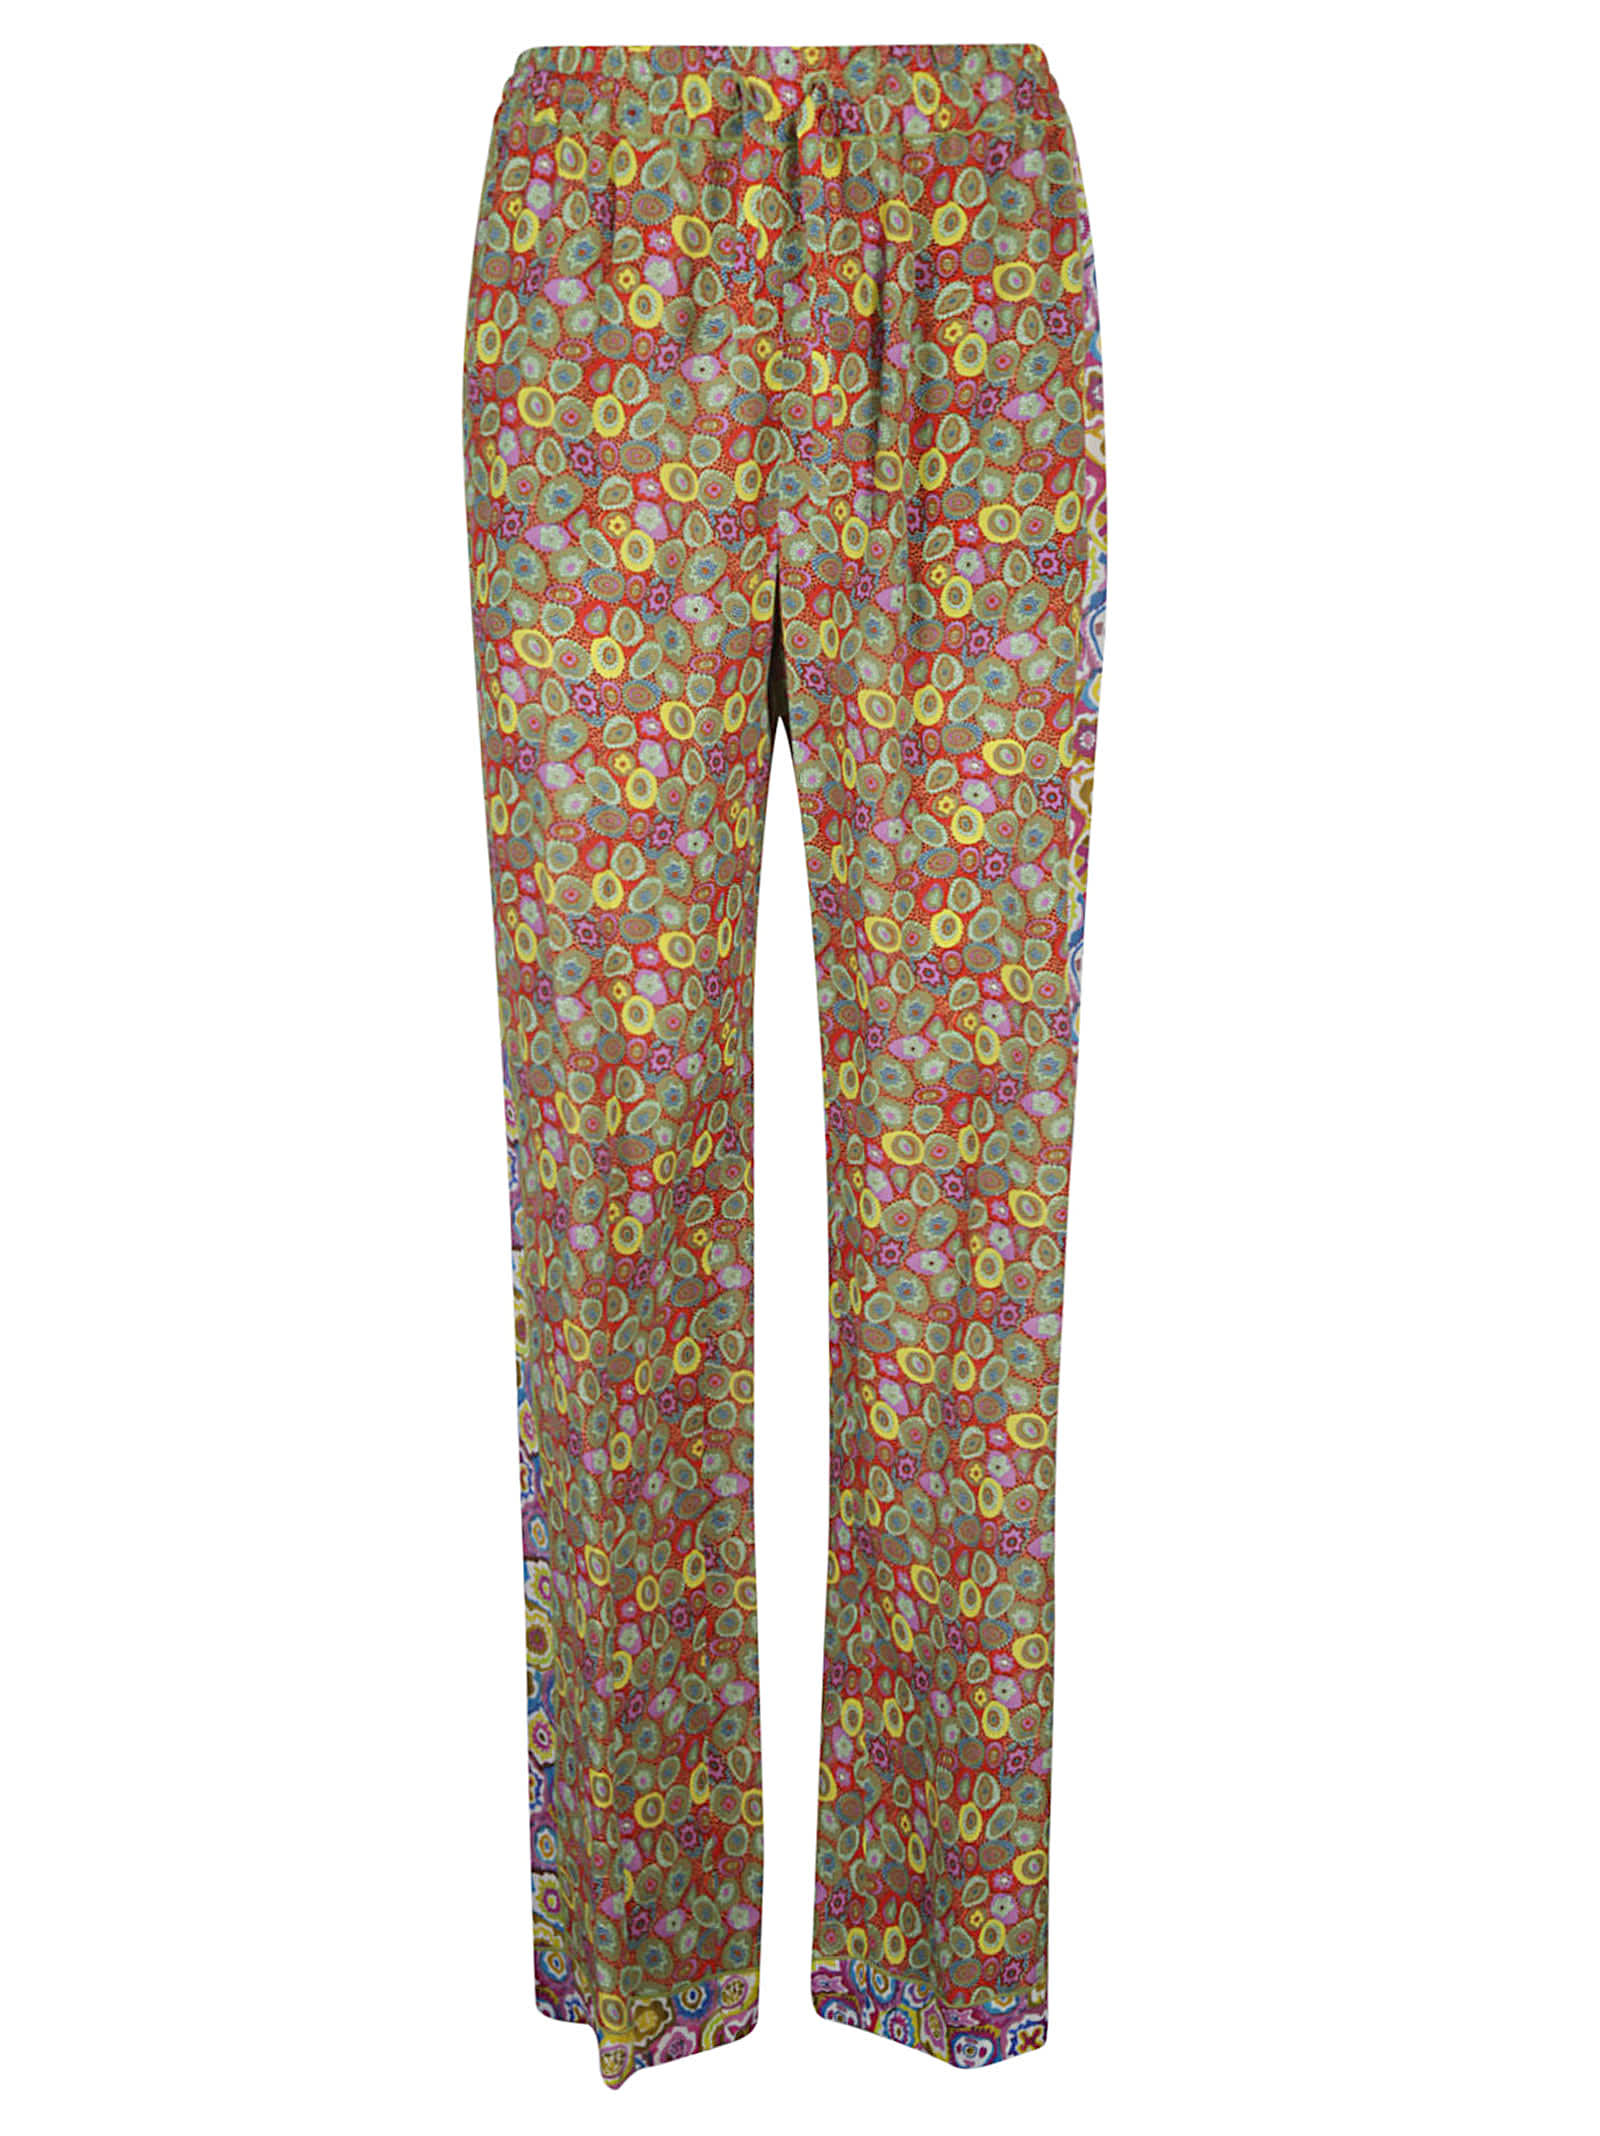 M Missoni All-over Printed Trousers